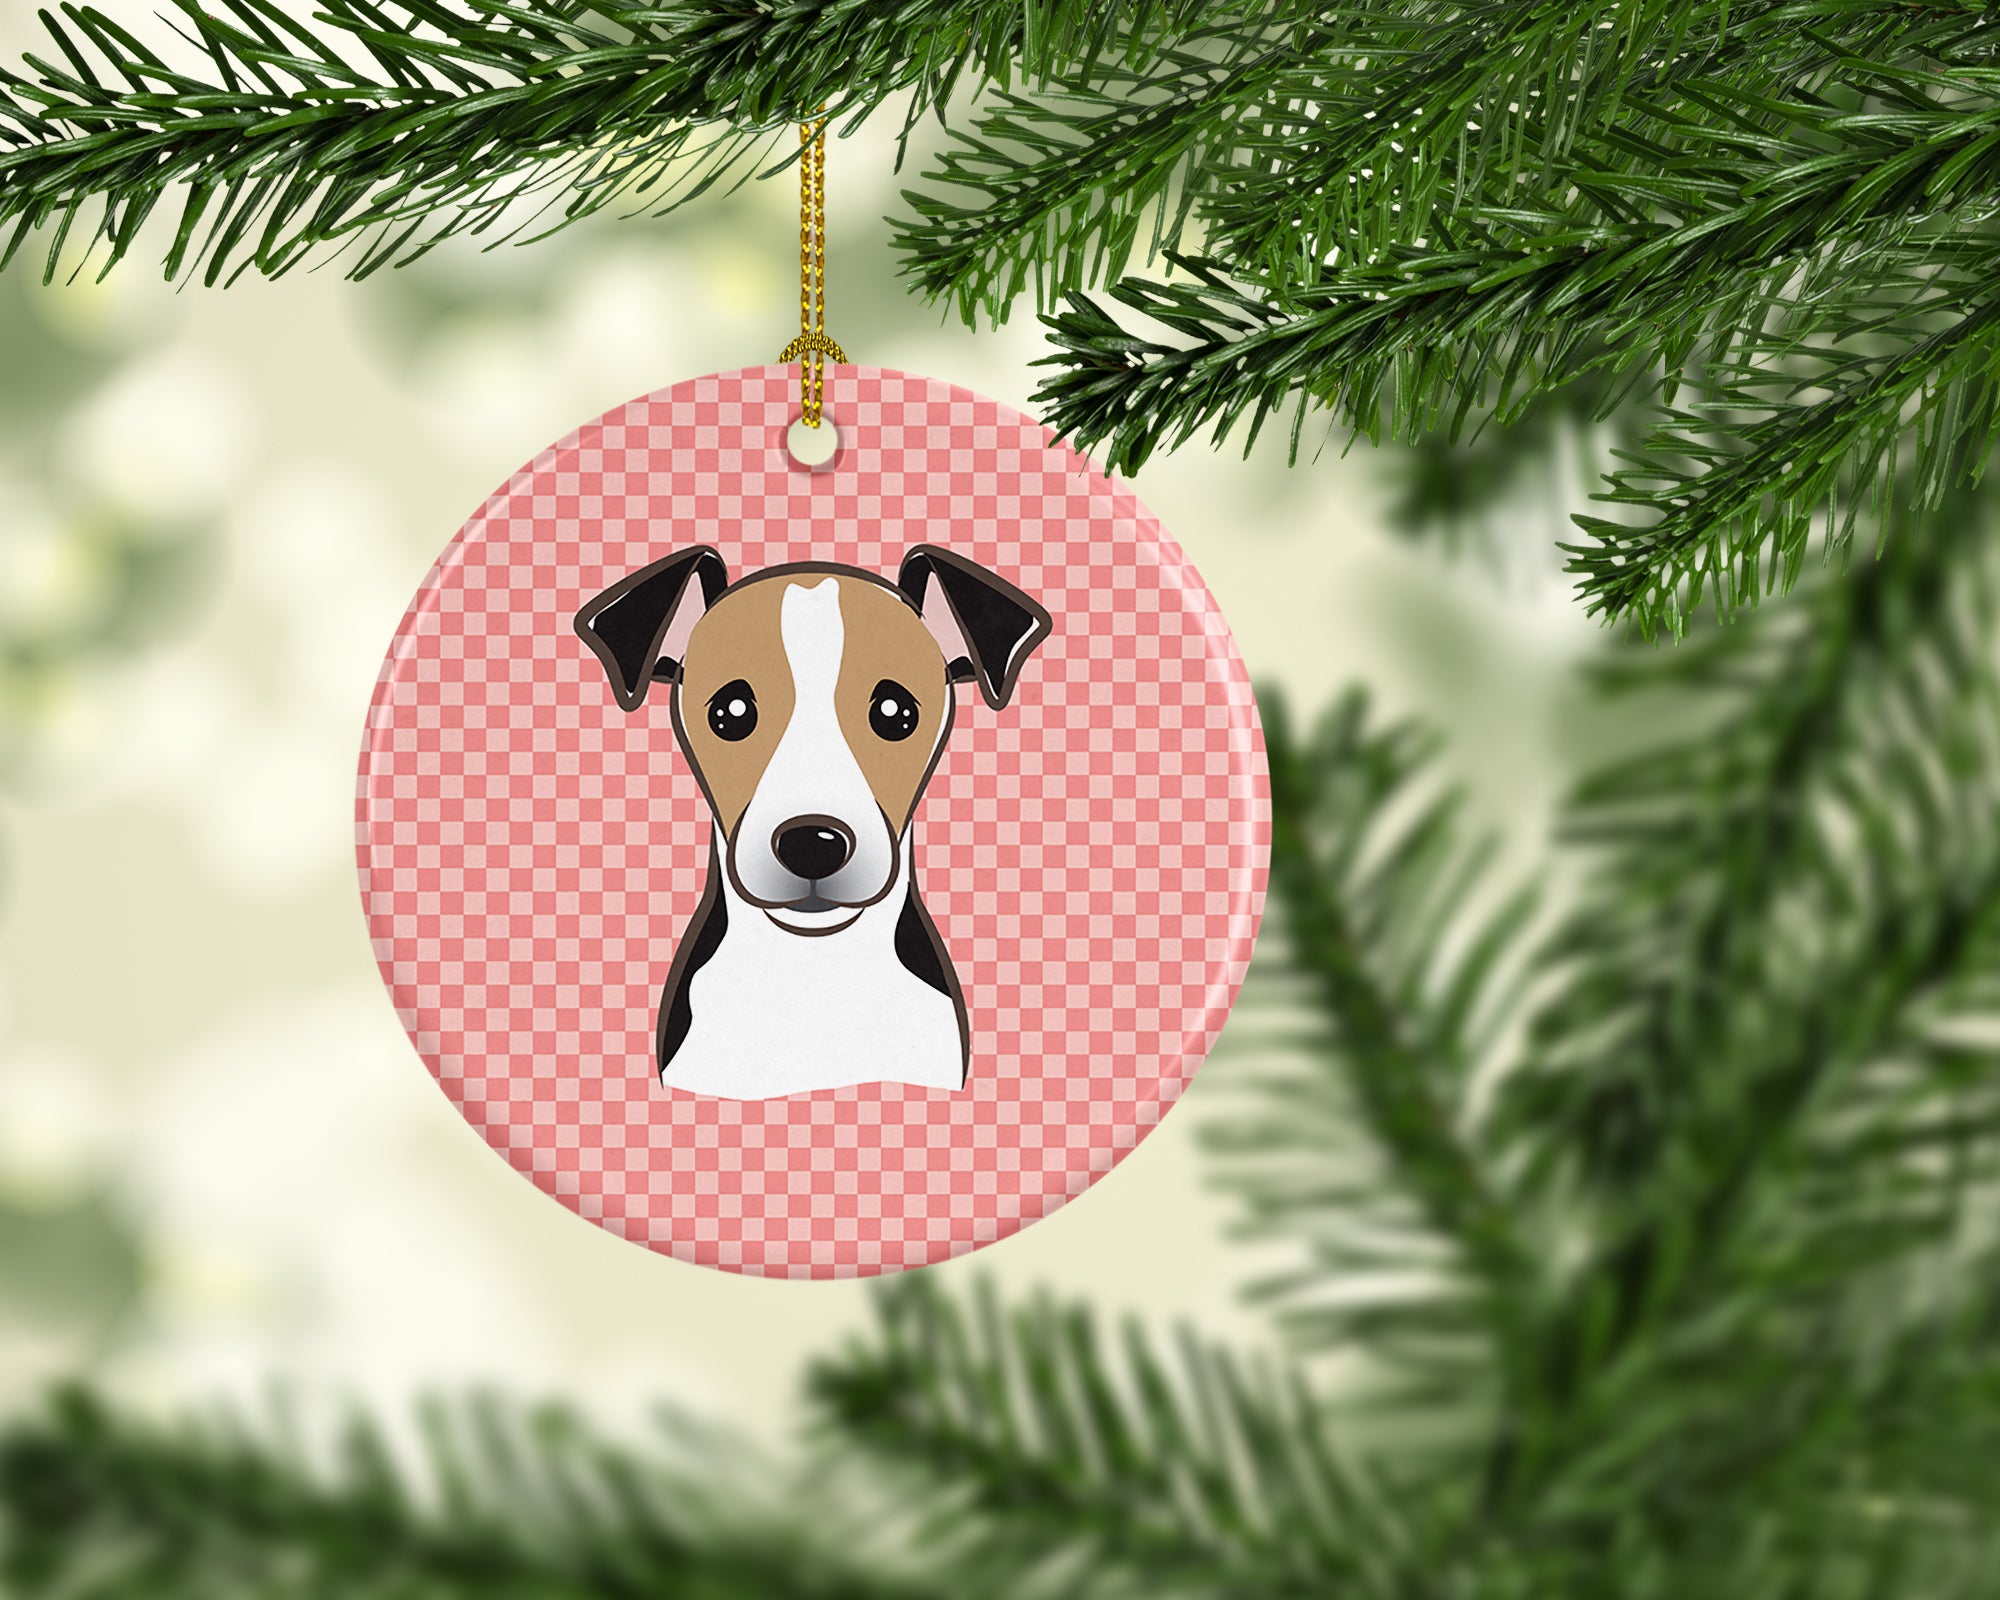 Checkerboard Pink Jack Russell Terrier Ceramic Ornament BB1261CO1 - the-store.com